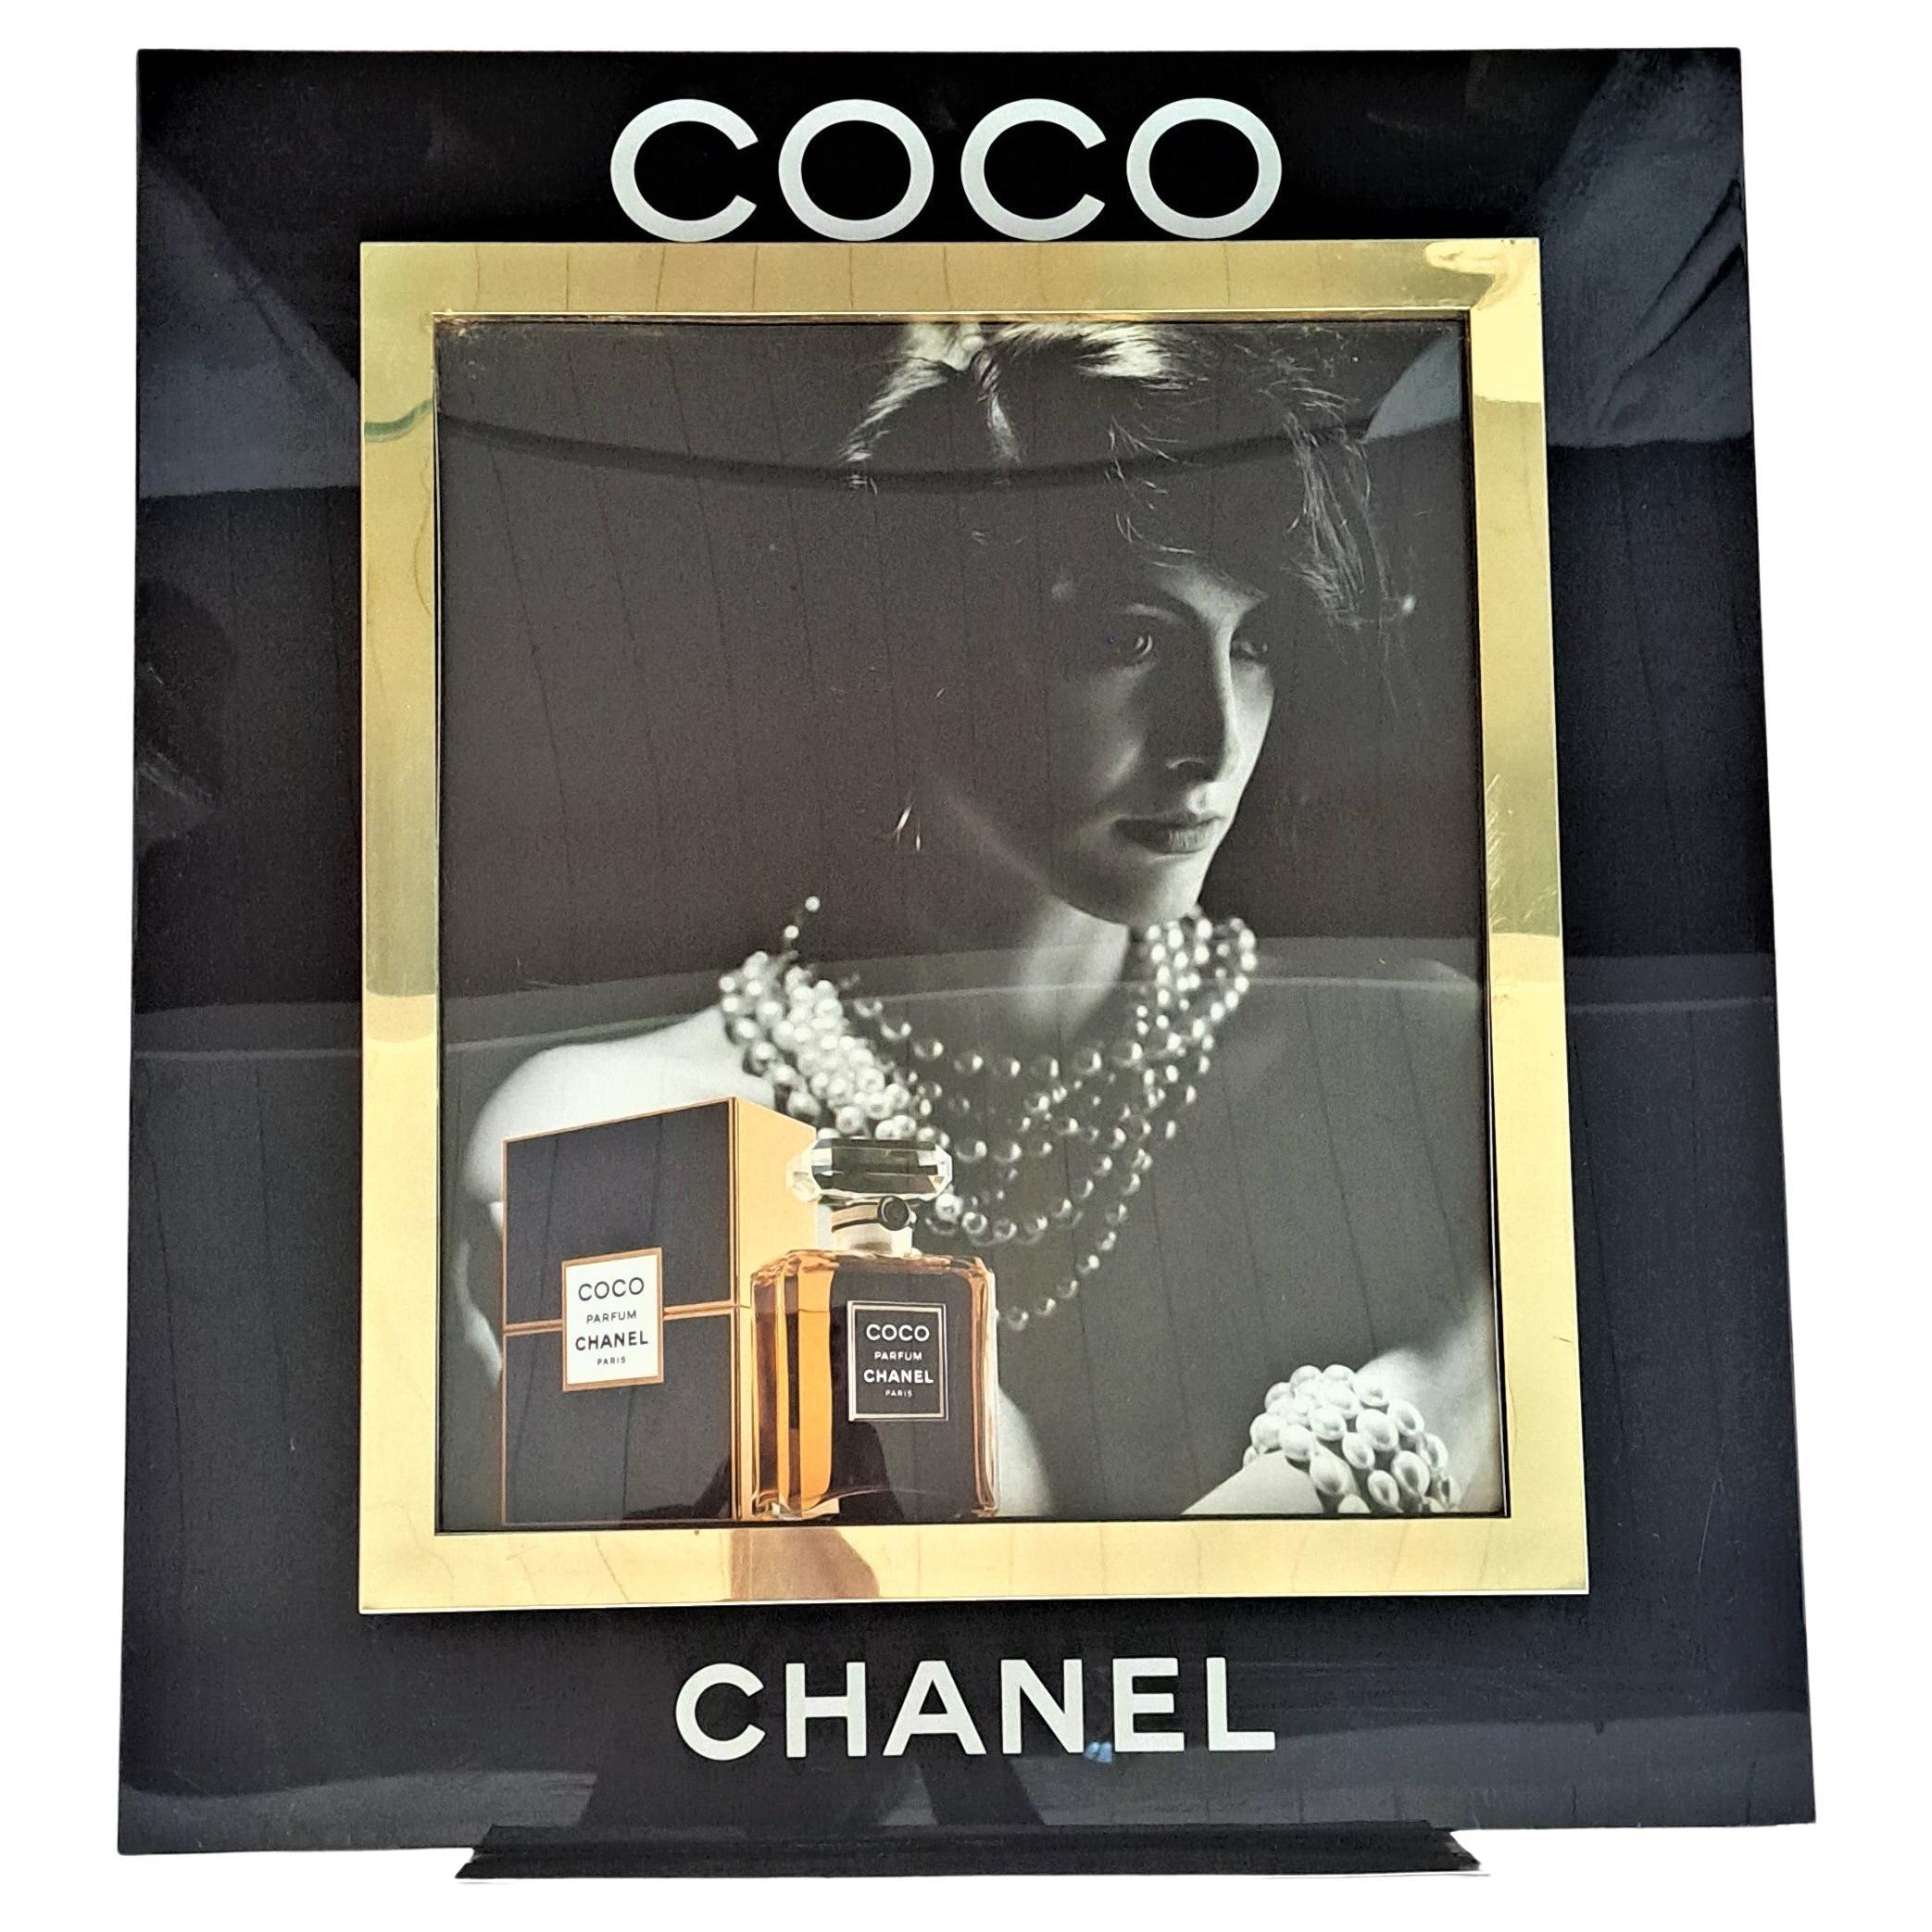 Coco Chanel Perfume Lightbox Ad 1988 Inés de la Fressange for Coco Chanel  For Sale at 1stDibs